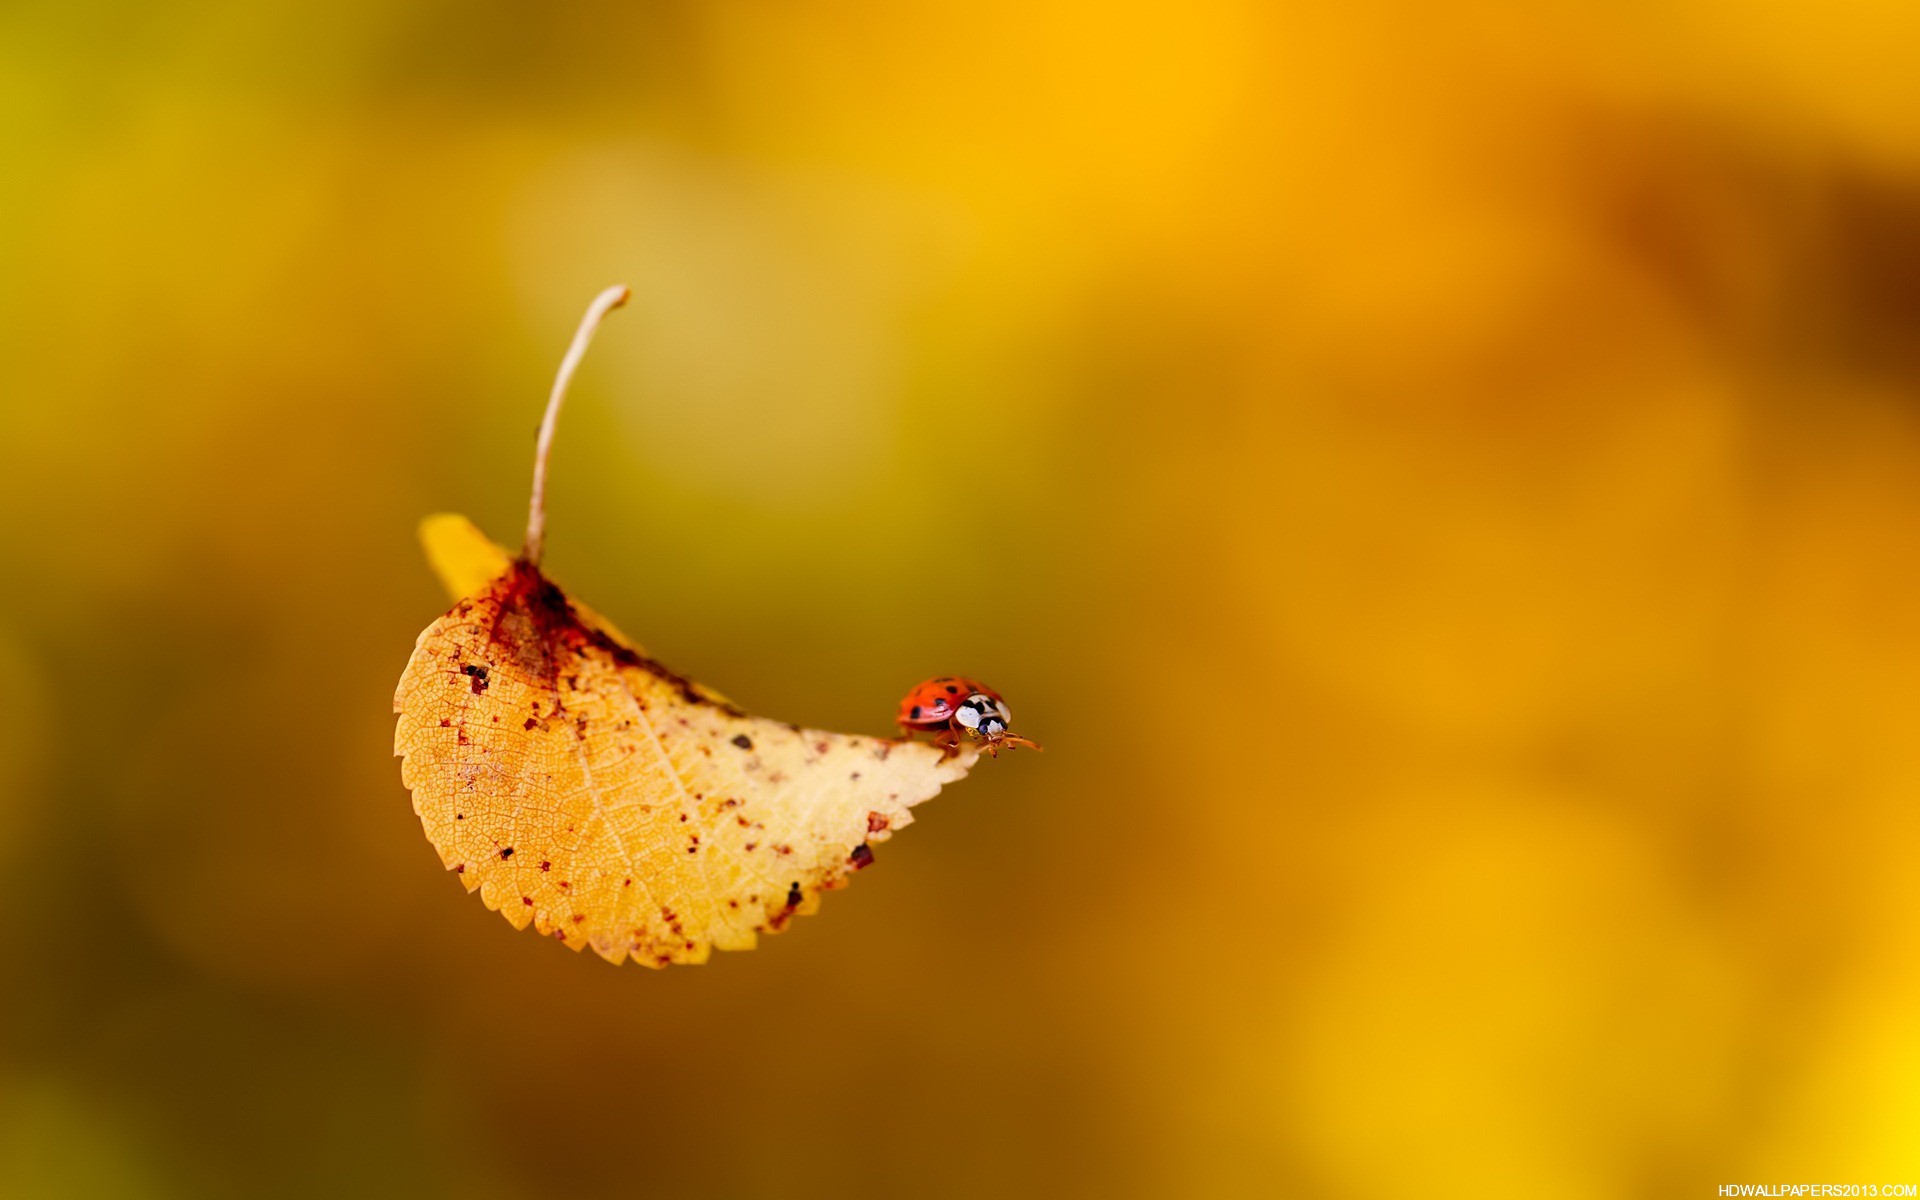 Cute Fall Desktop Background Image Amp Pictures Becuo